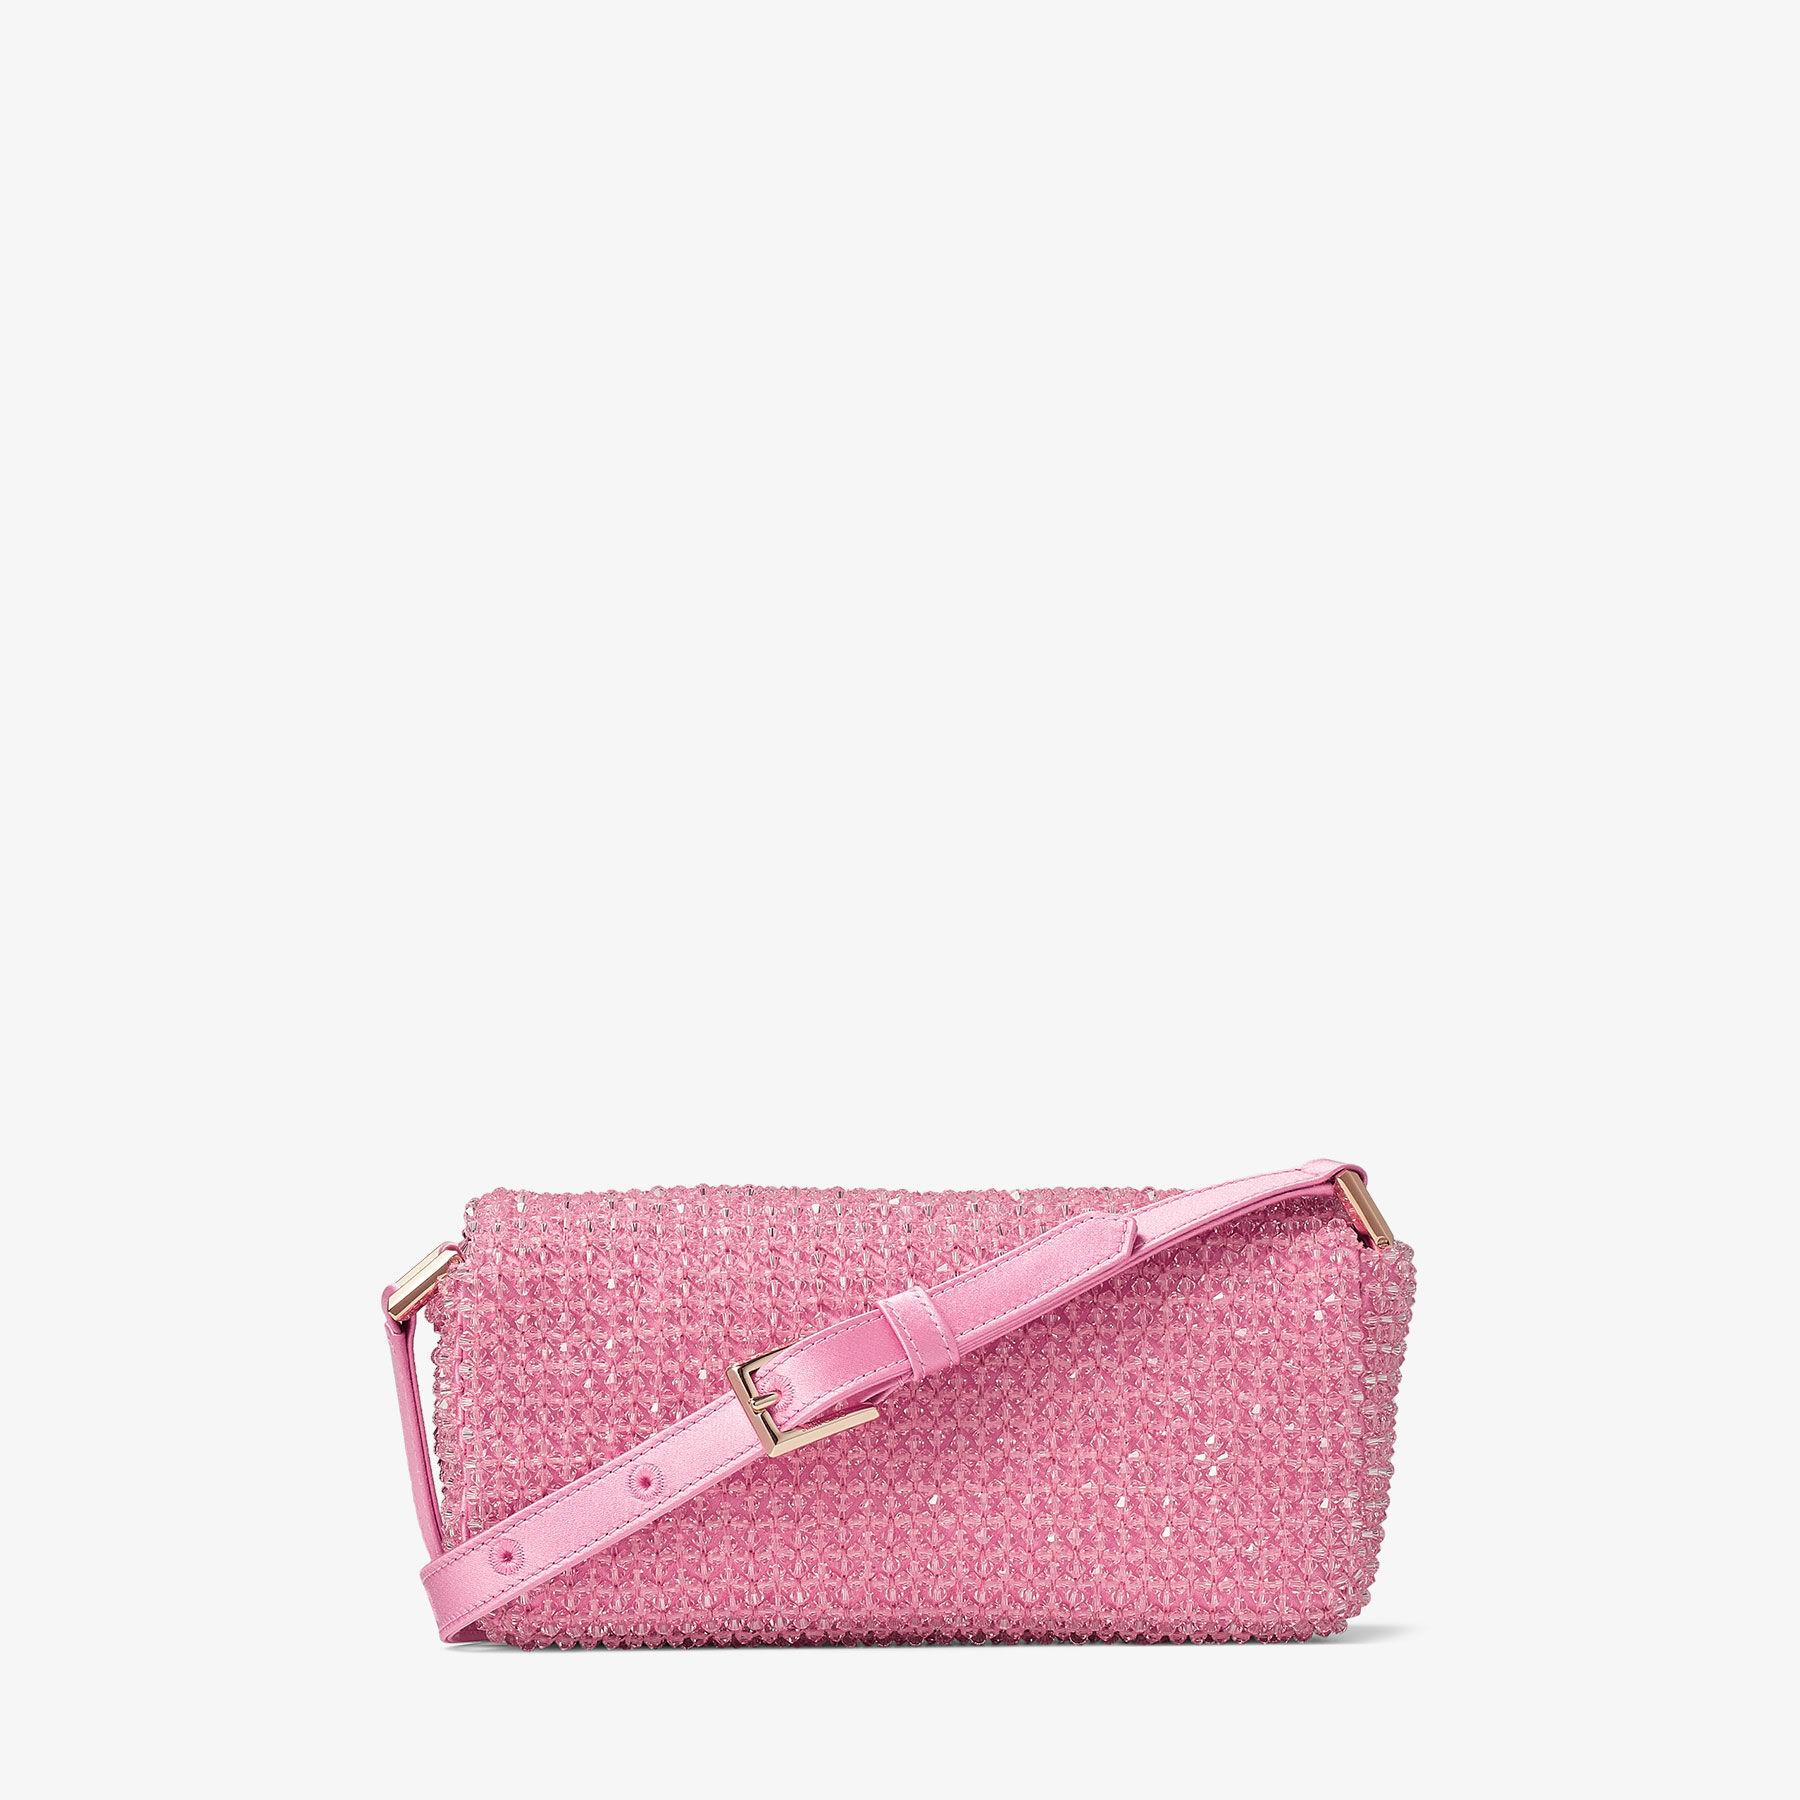 CALLIE |Candy Pink Metallic Snake Printed Leather Clutch Bag | New  Collection | JIMMY CHOO